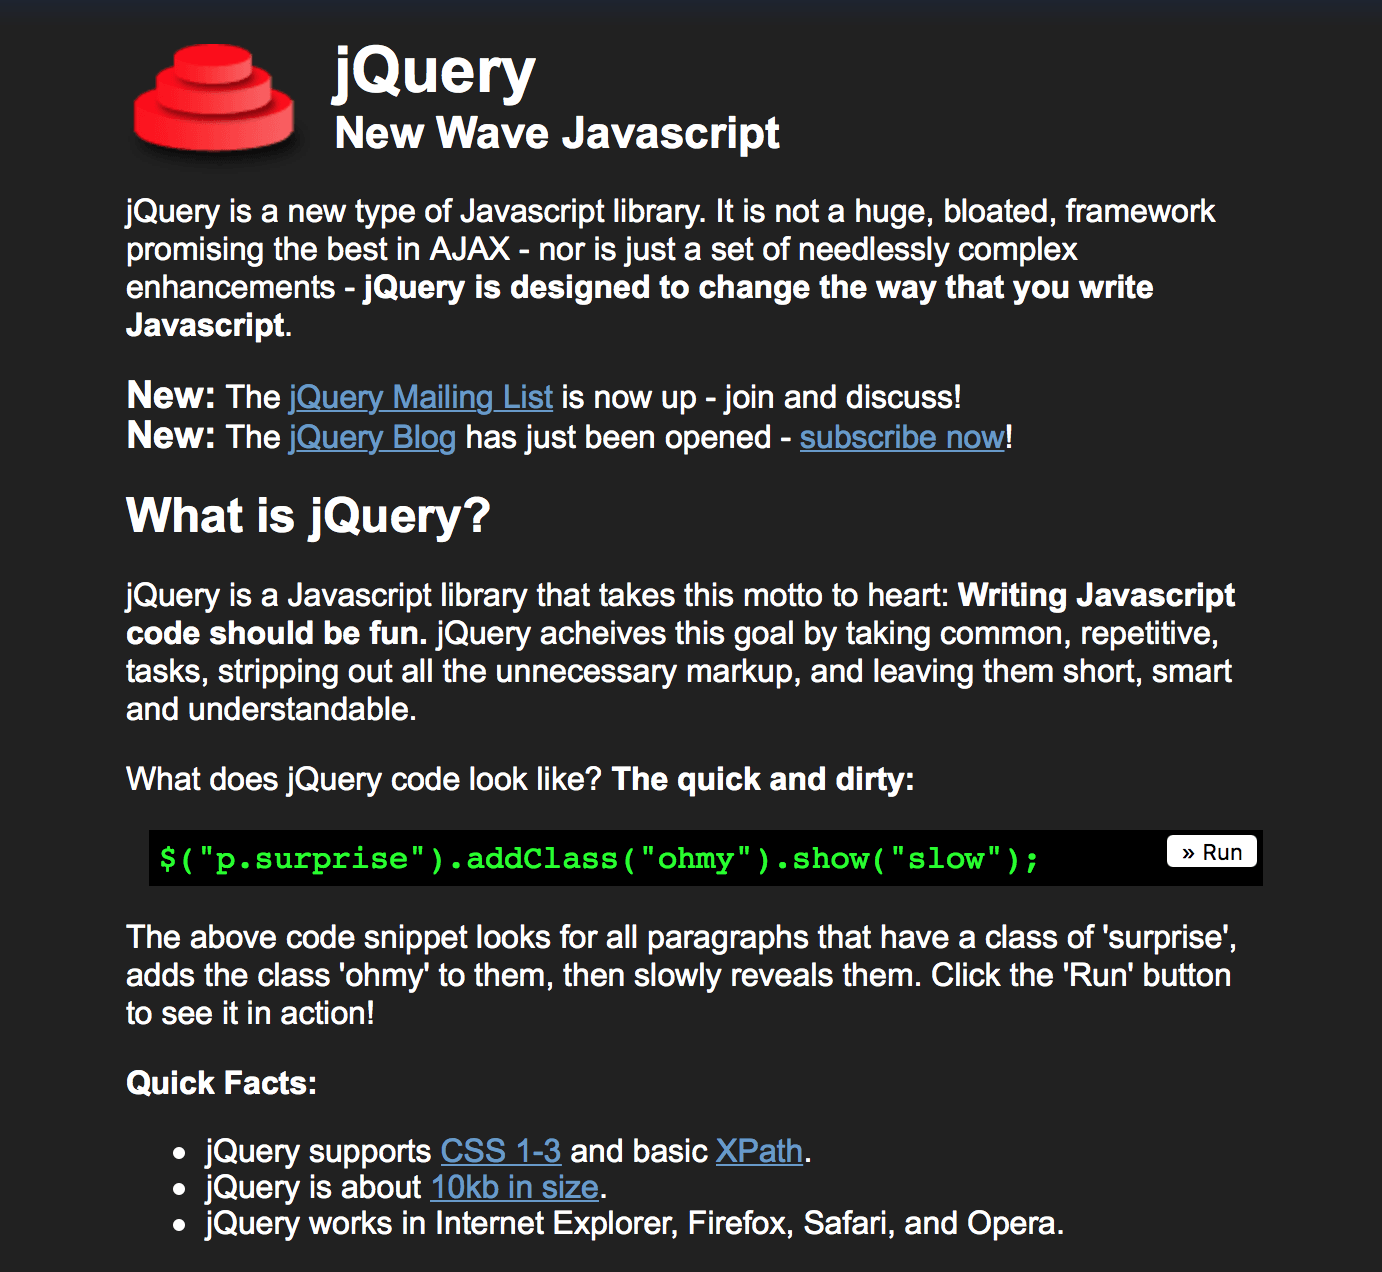 The jQuery site as it appeared in 2006